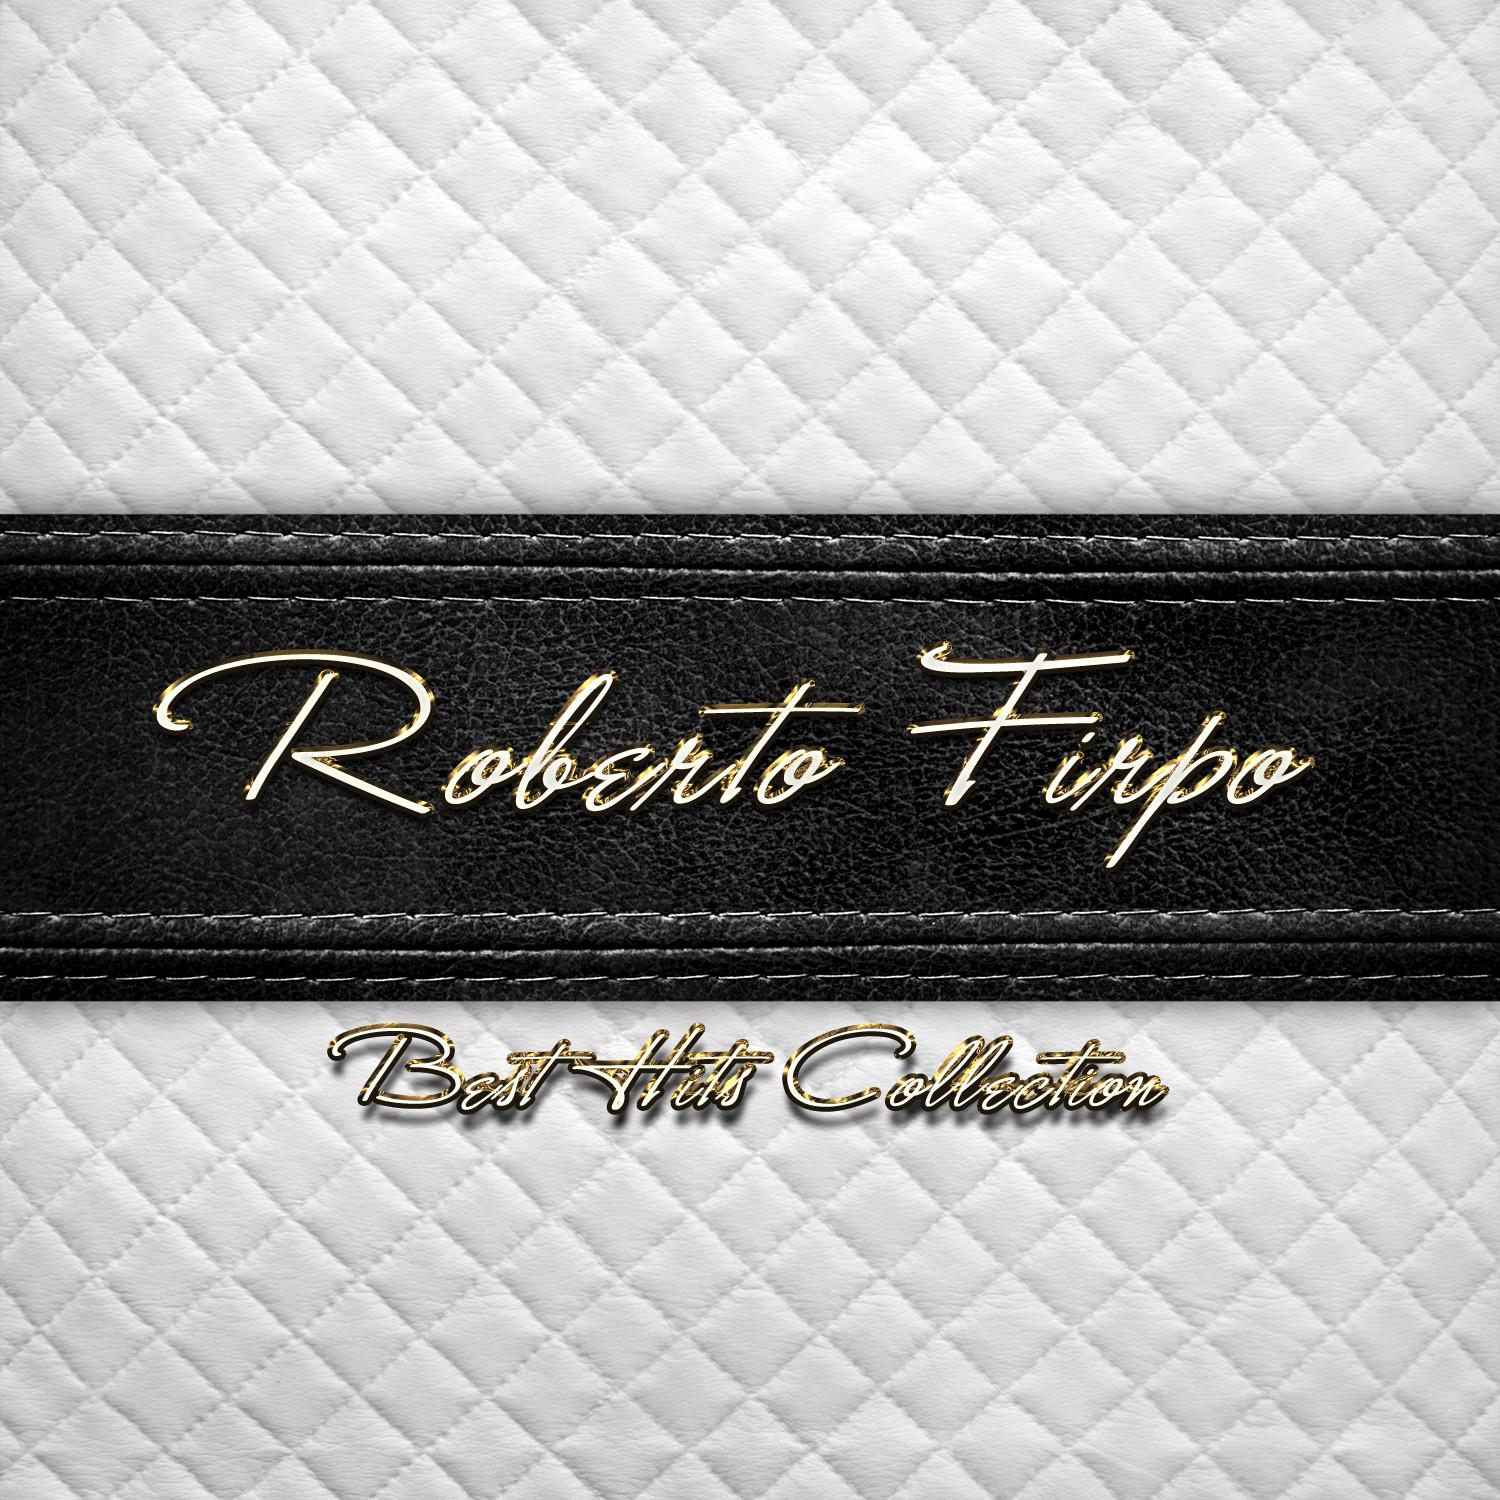 Best Hits Collection of Roberto Firpo